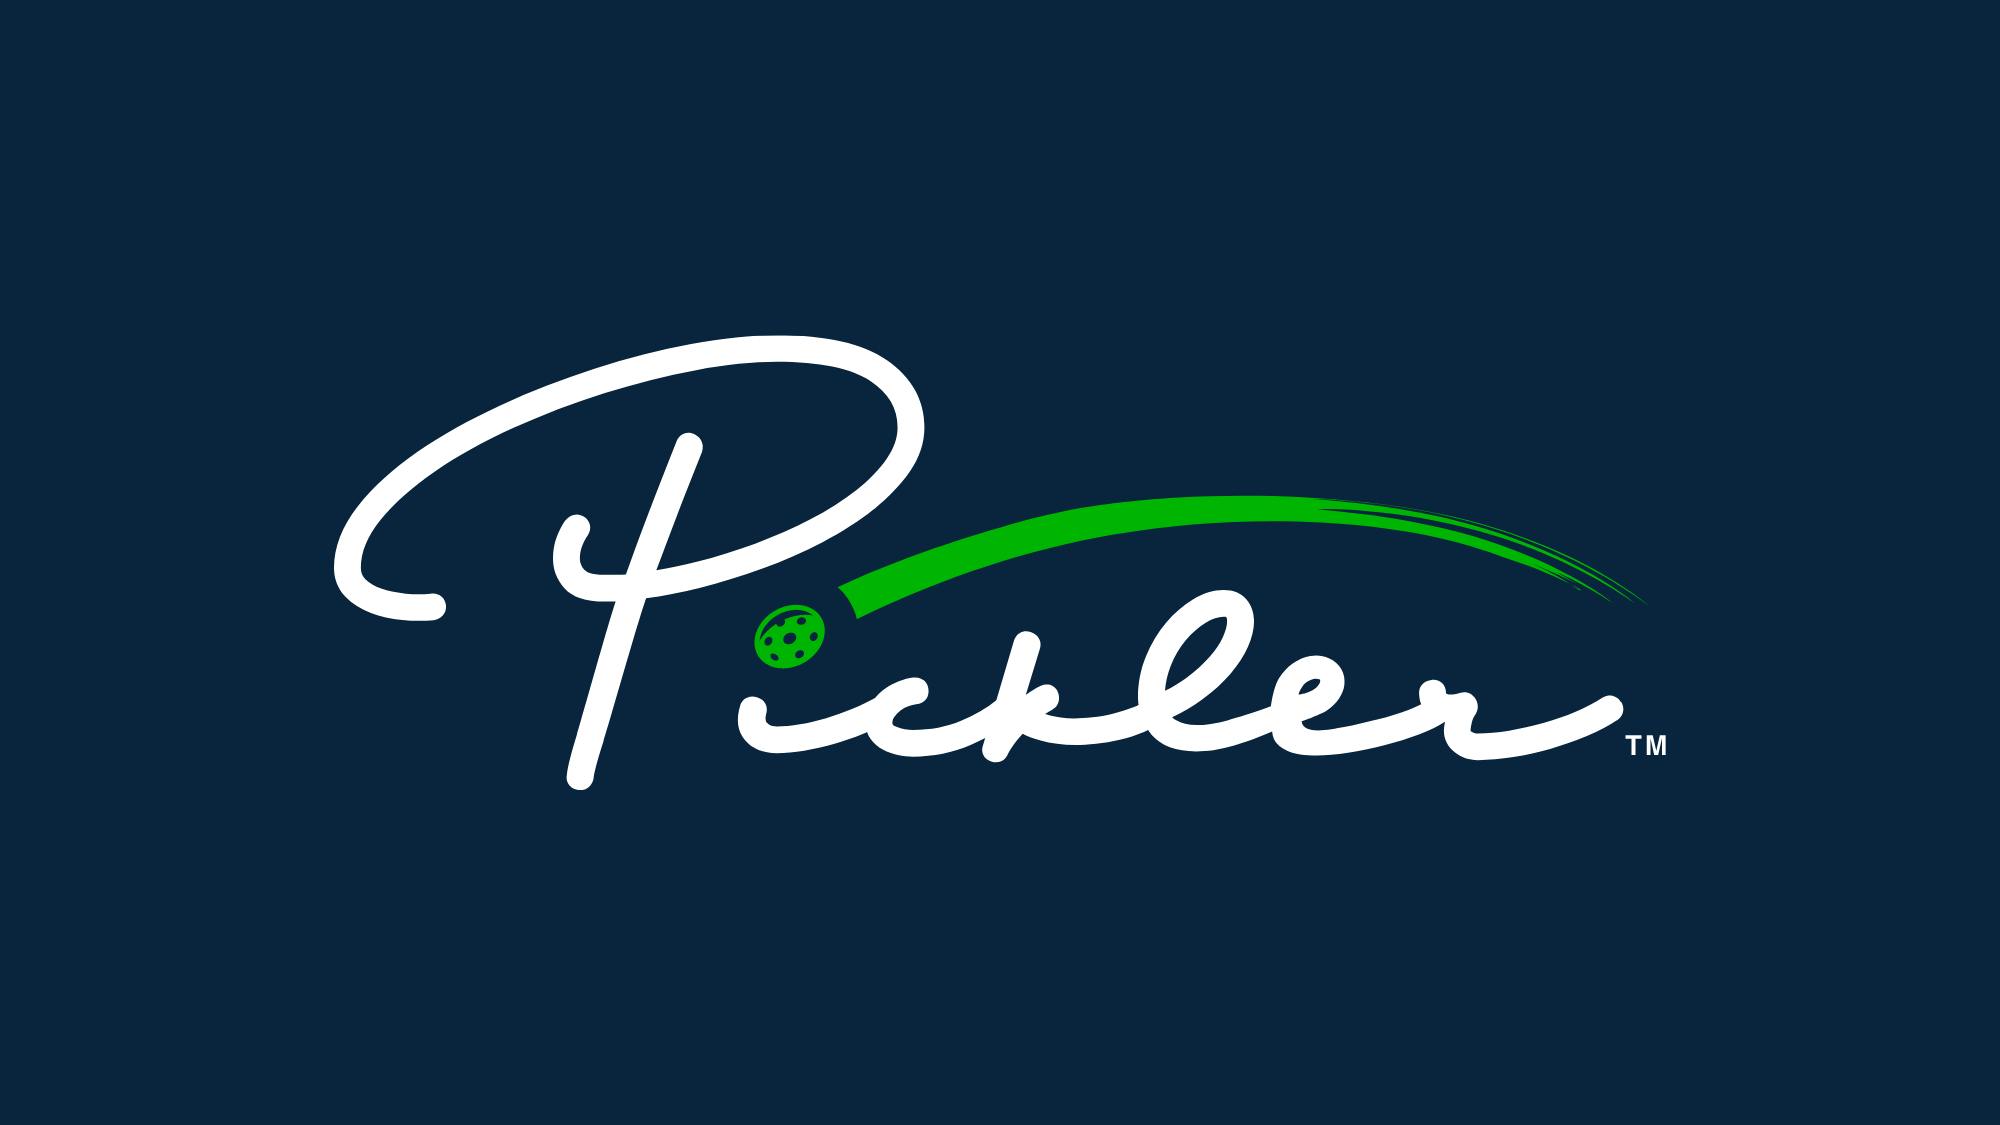 The Pickler - Same Great Content, New Look and Feel